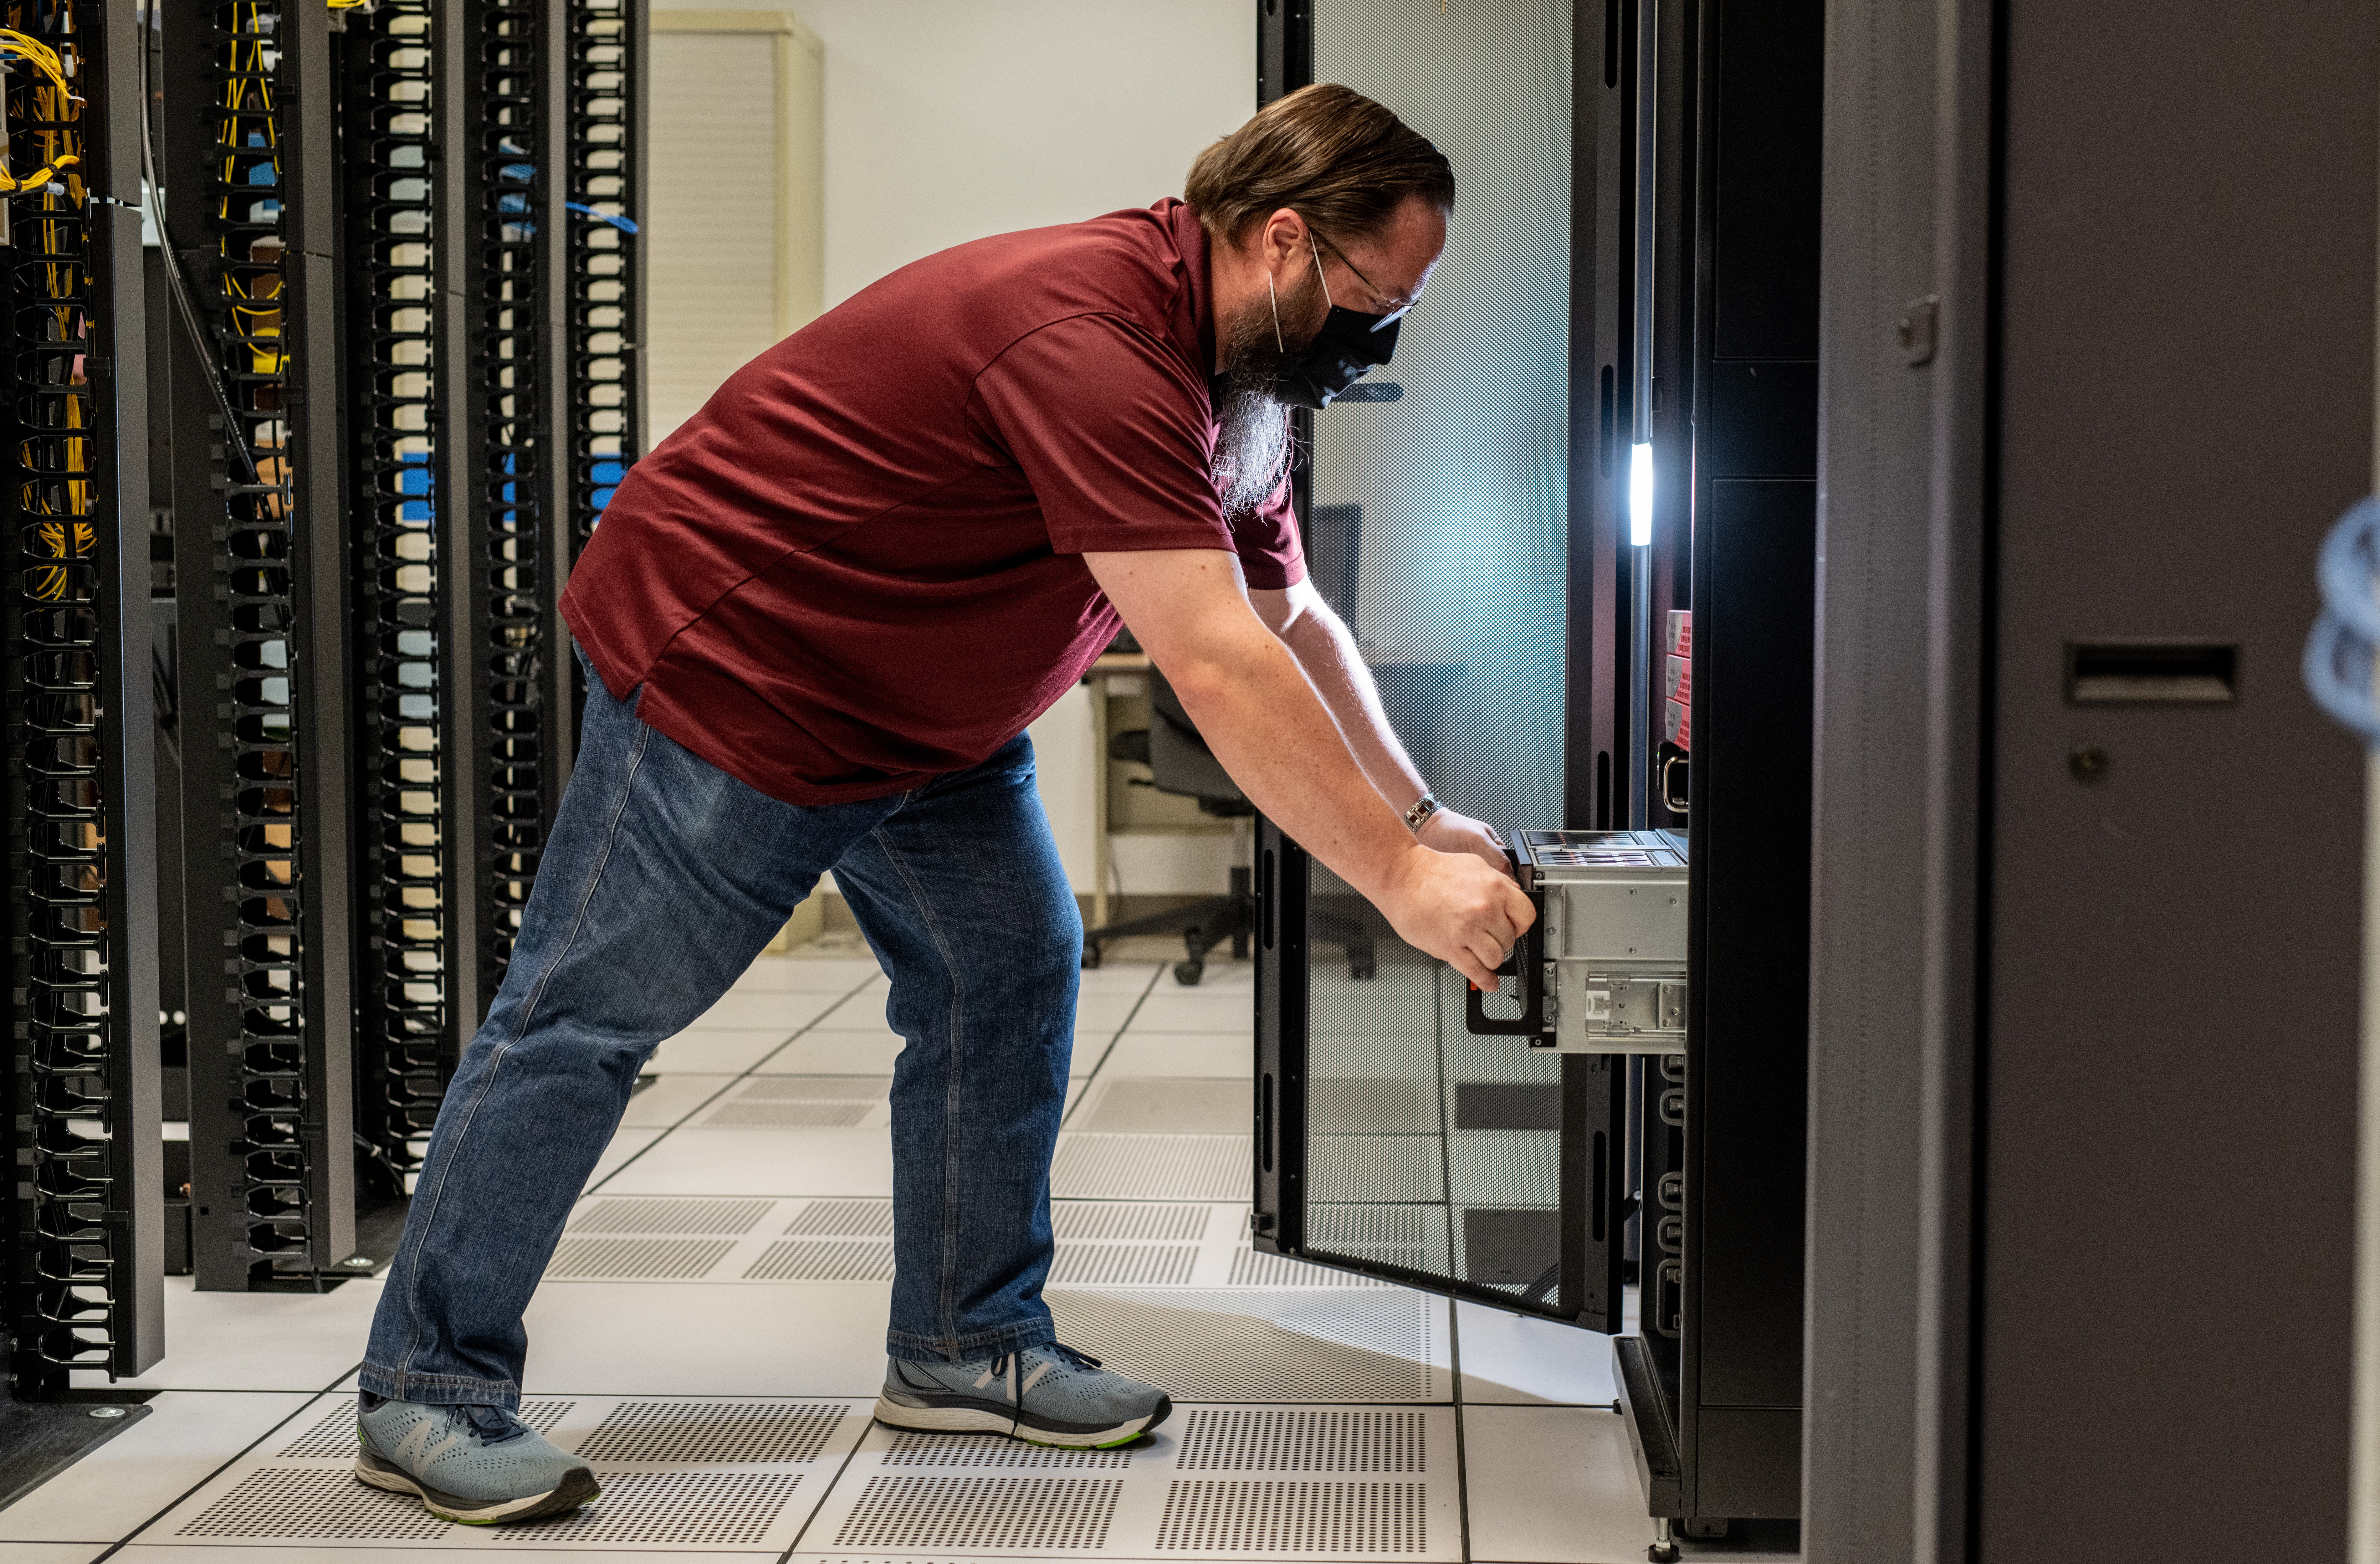 Lafayette College did not plan for large-scale installations or cumbersome hardware-based solutions as the pandemic began. Rather, the team designed a set of capabilities that can be quickly deployed at any time, and anywhere.